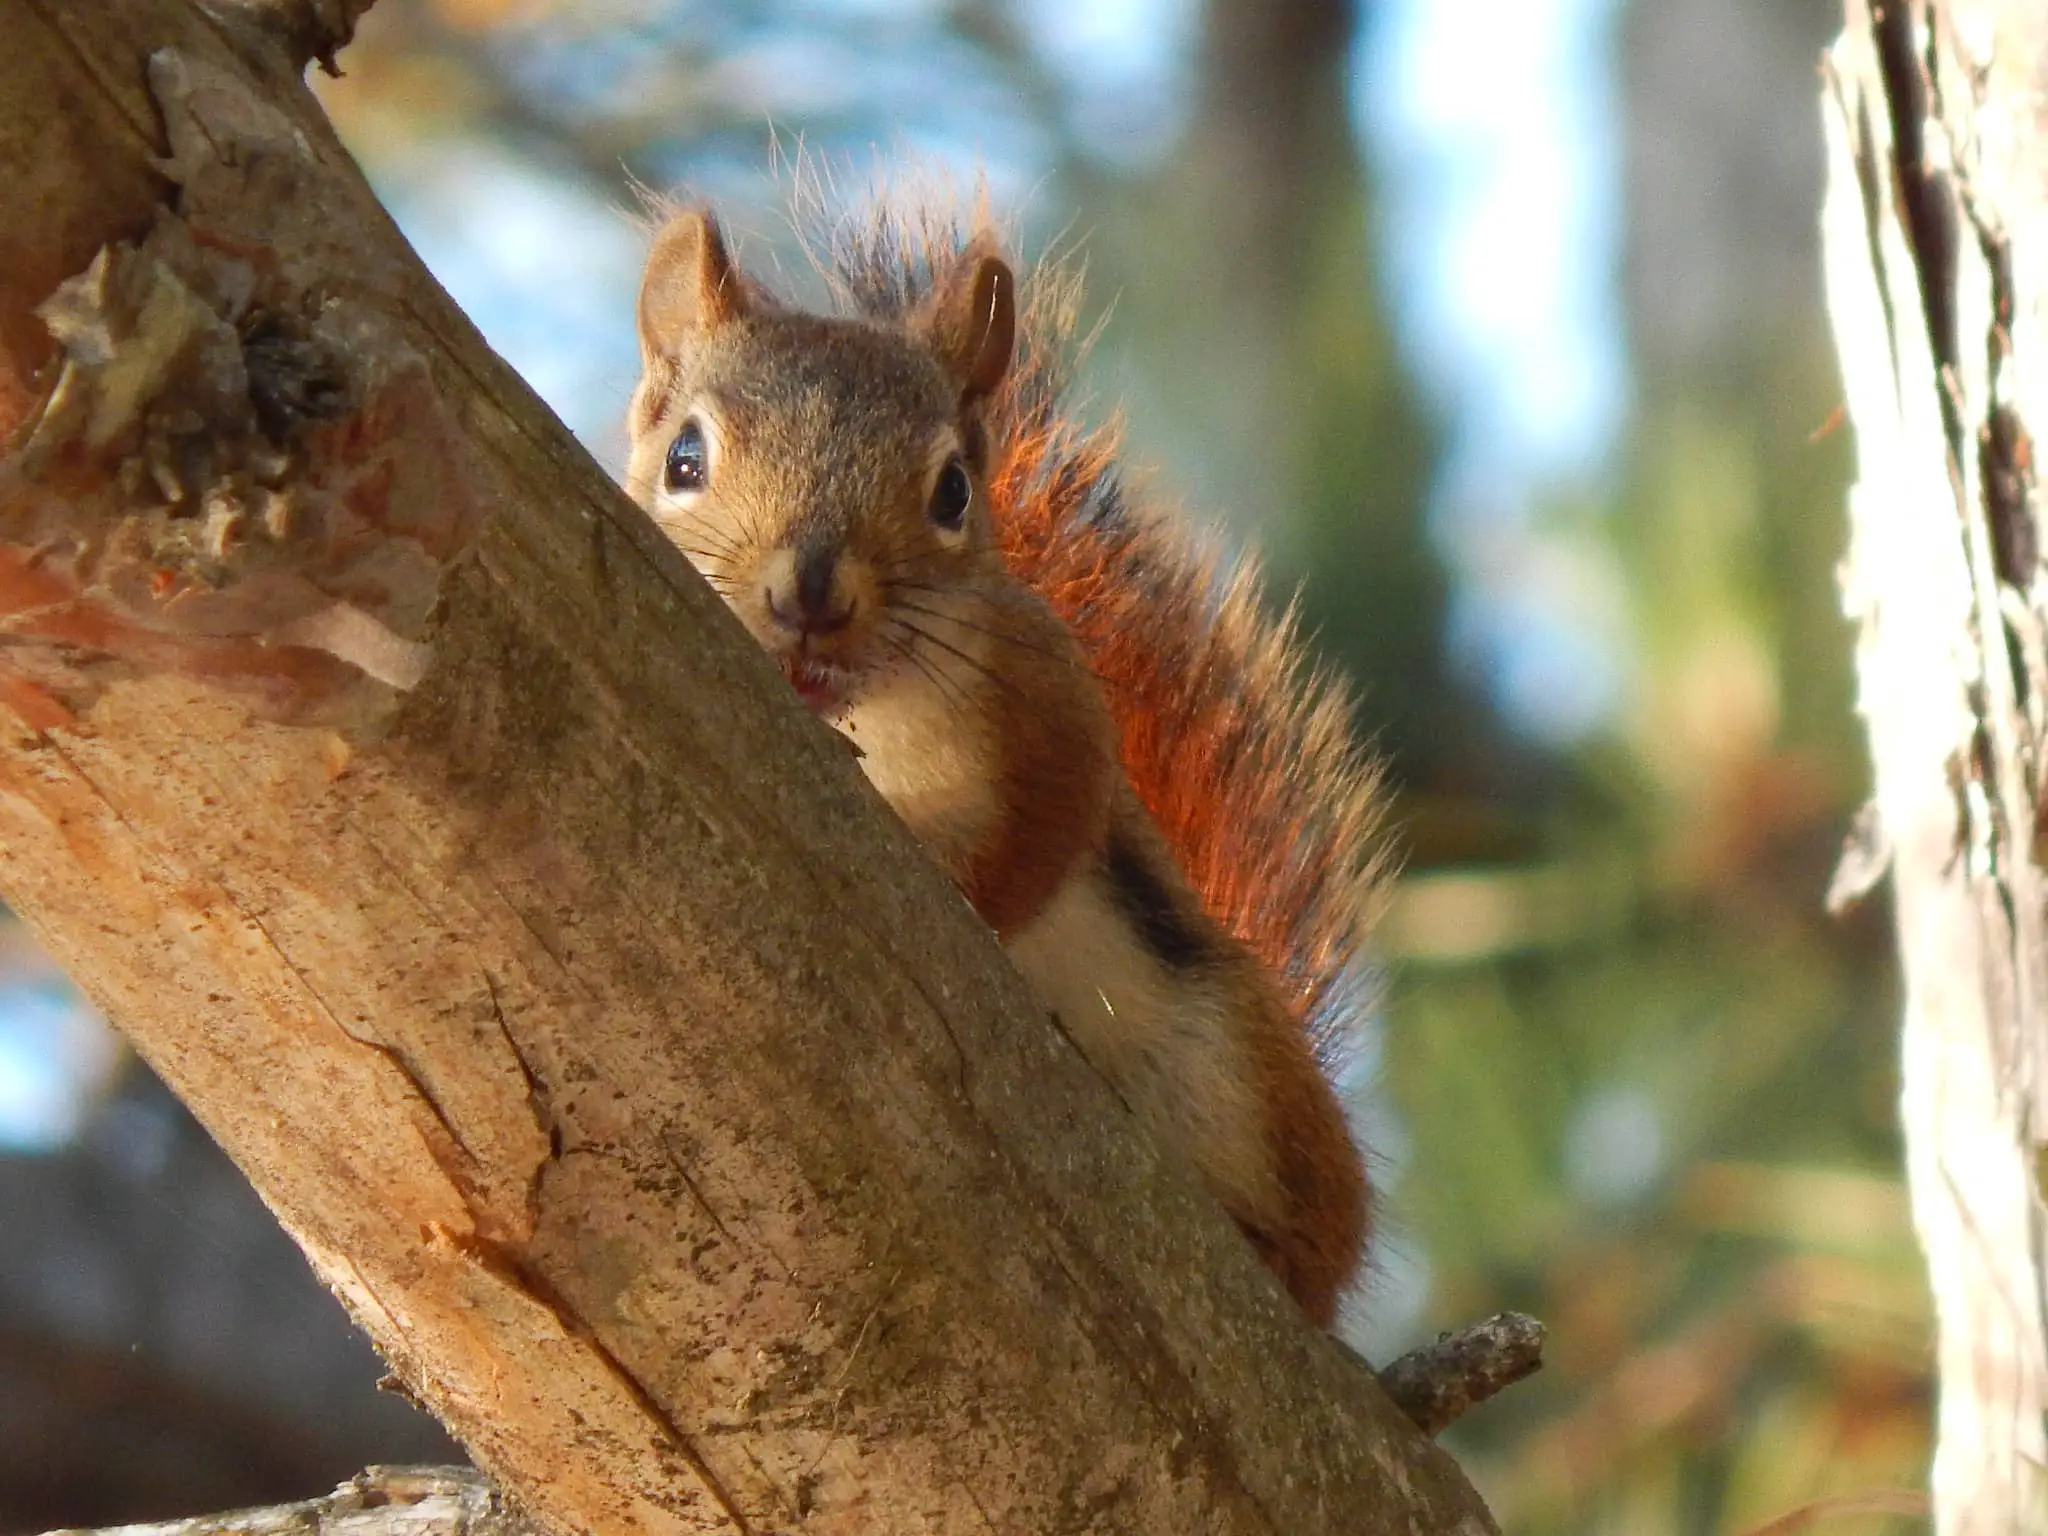 red squirrel looking from behind a tree trunk